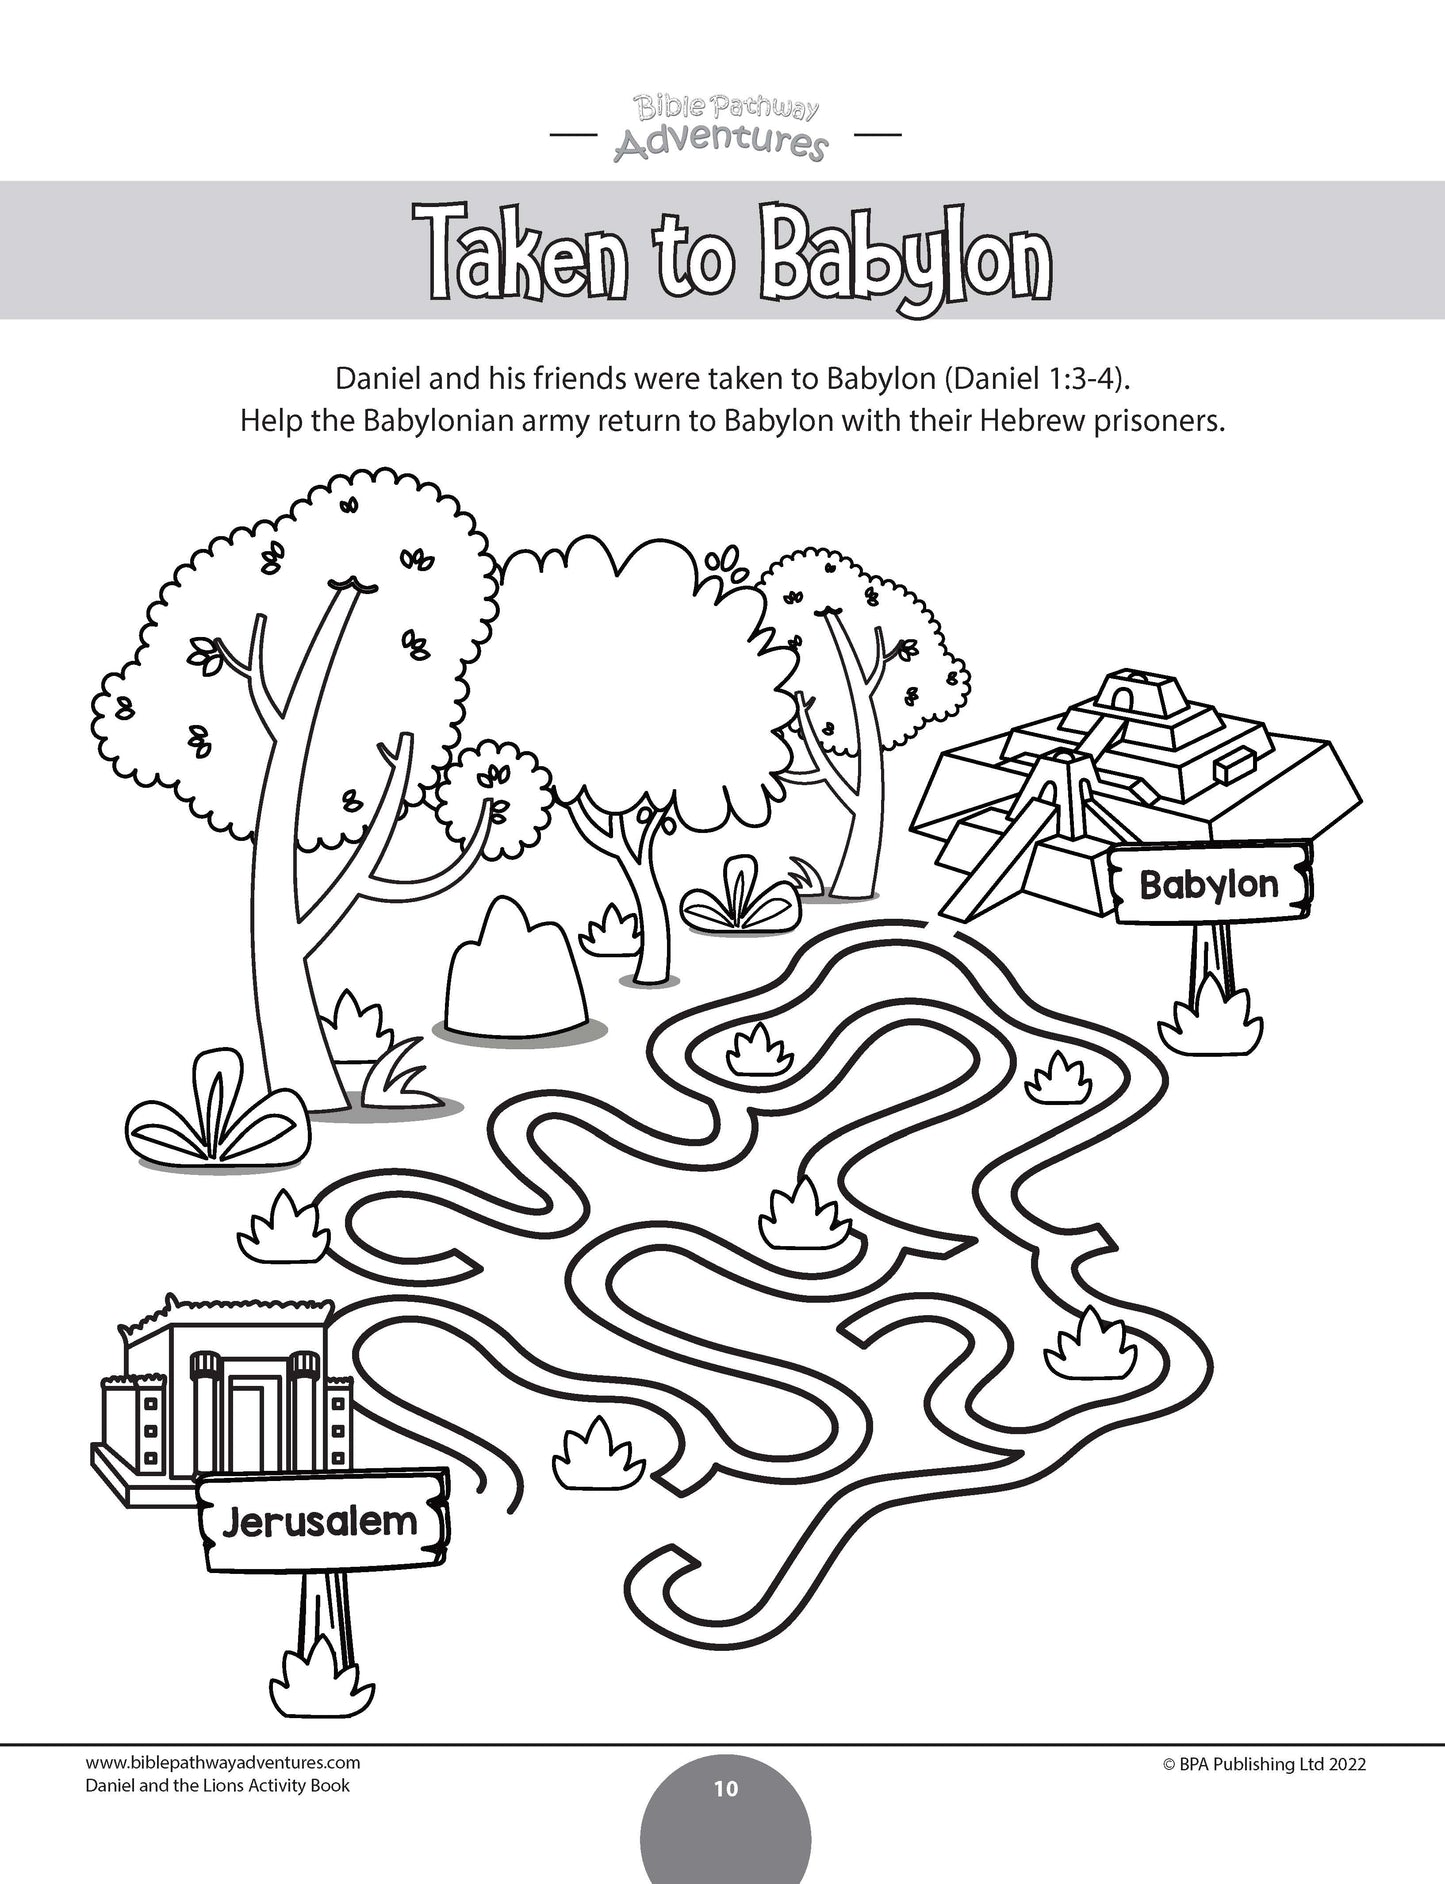 Daniel and the Lions Activity Book